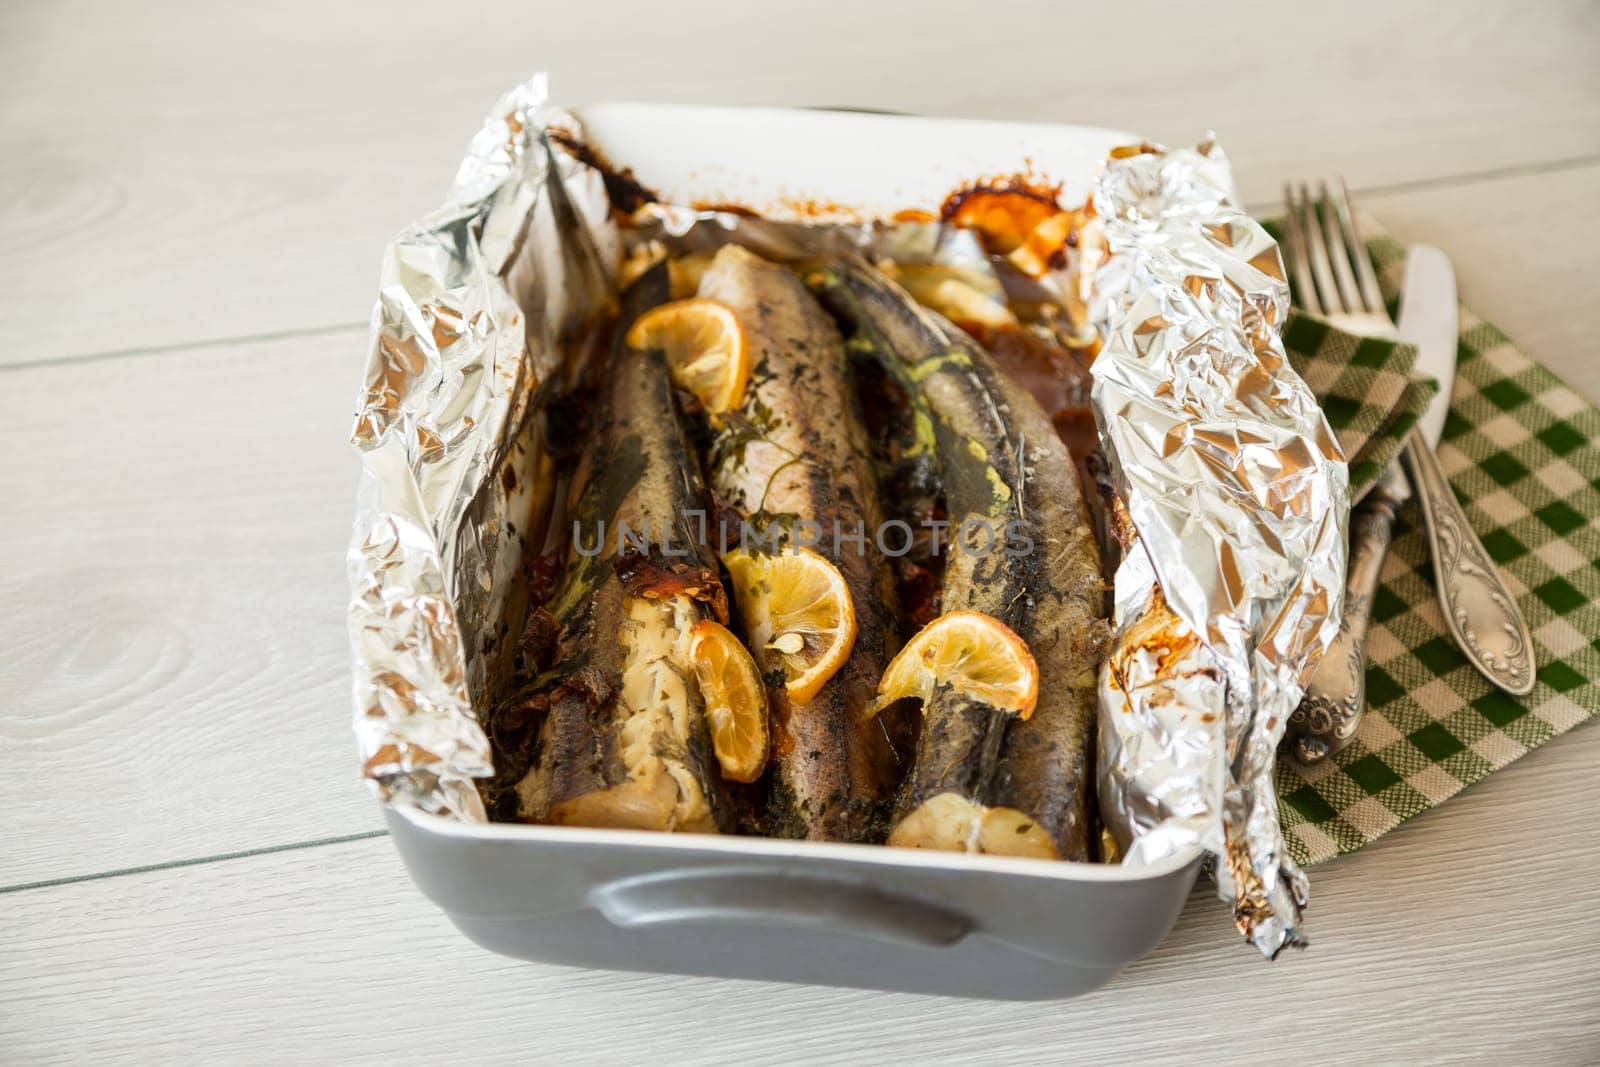 Baked fish with seasonings and spices in foil, in a ceramic form.